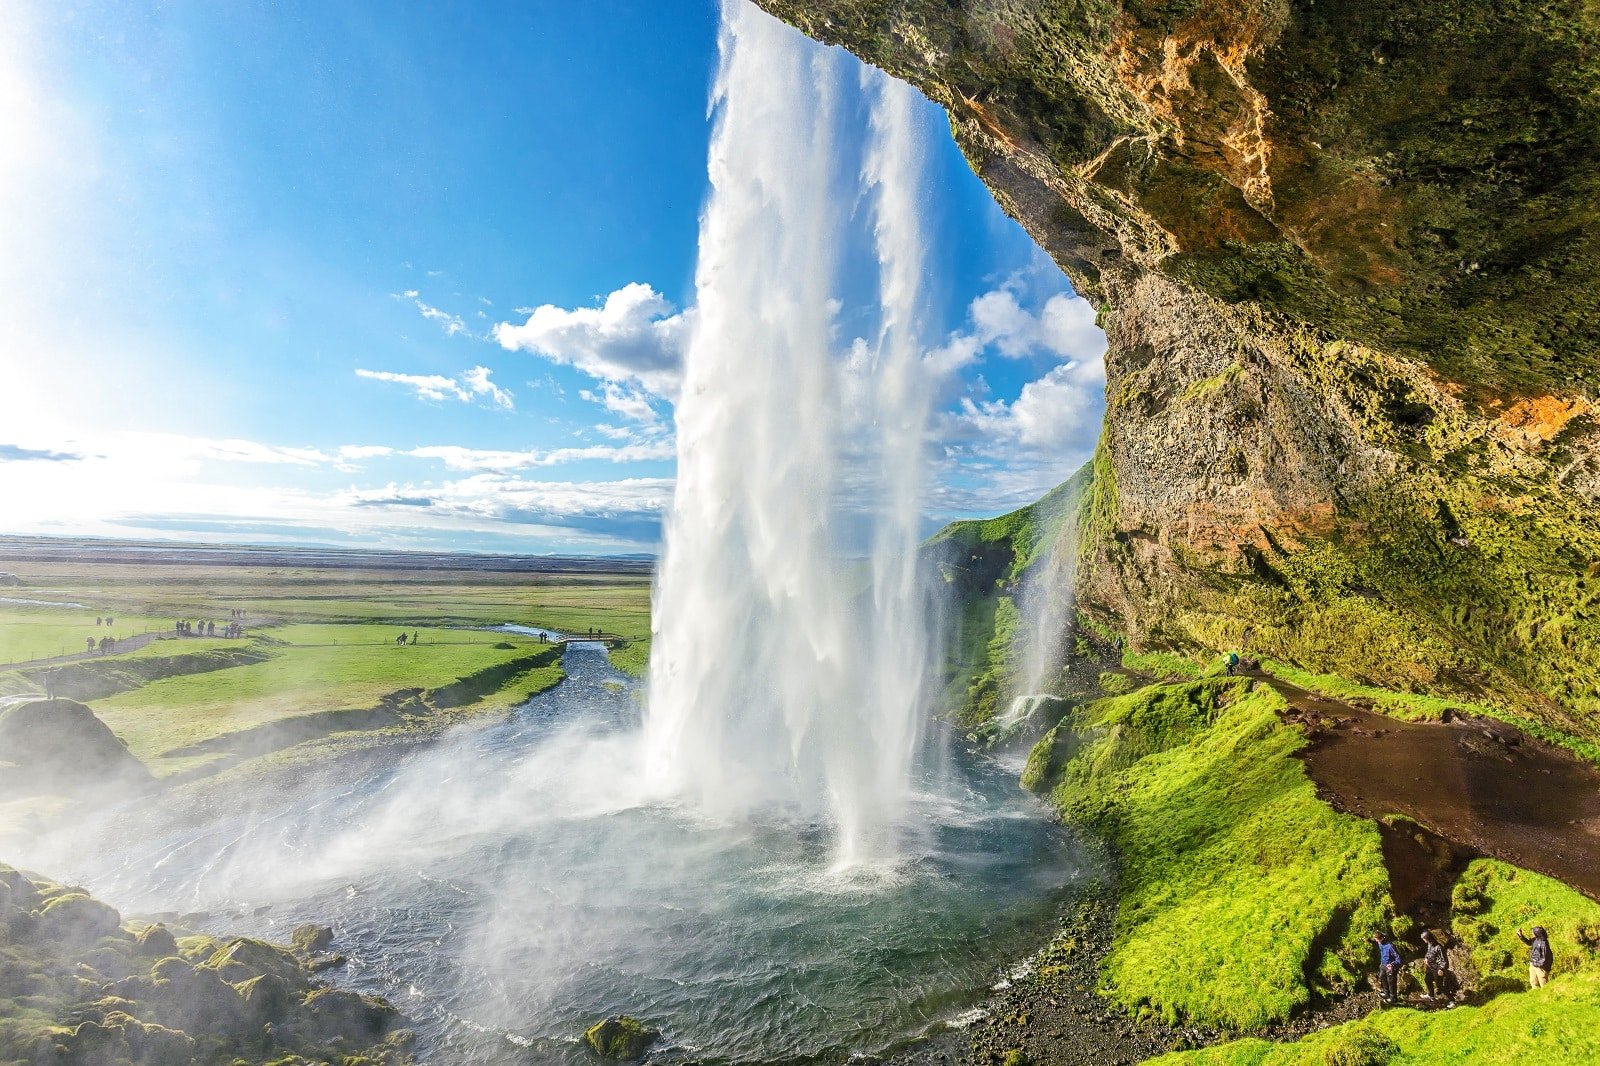 <p><span>Experience the unique beauty of Seljalandsfoss in Iceland, one of the few waterfalls you can walk behind. This 60-meter-high waterfall, part of the Seljalands River, cascades over a cliff, allowing visitors to walk behind it for a unique perspective. The path can be slippery, so waterproof gear is recommended. The waterfall is particularly picturesque during the long summer days but offers a magical sight when lit at night.</span></p> <p><b>Insider’s Tip: </b><span>Wear waterproof gear if you plan to walk behind the falls. </span></p> <p><b>When To Travel: </b><span>Summer for easier access and longer daylight hours. </span></p> <p><b>How To Get There: </b><span>Drive from Reykjavik along the South Coast.</span></p>